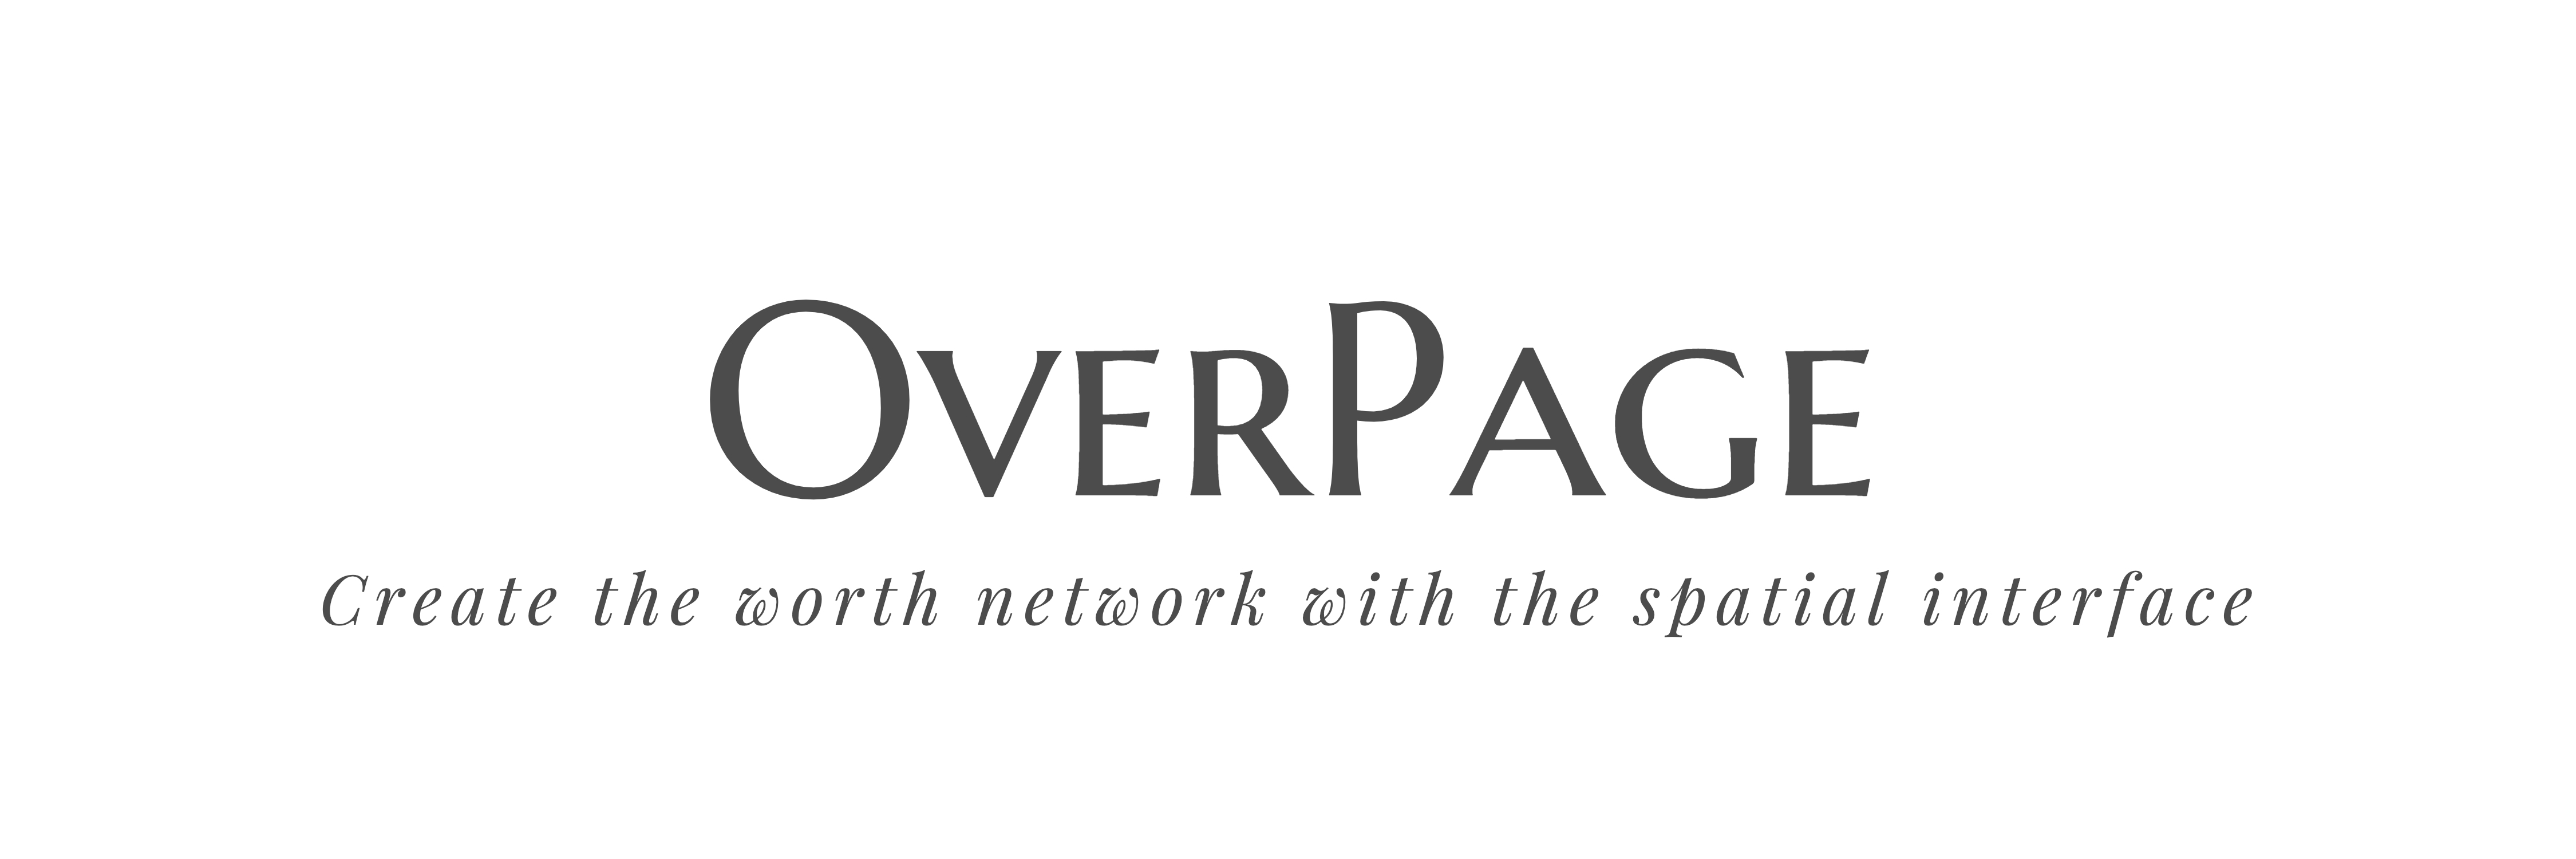 OverPage